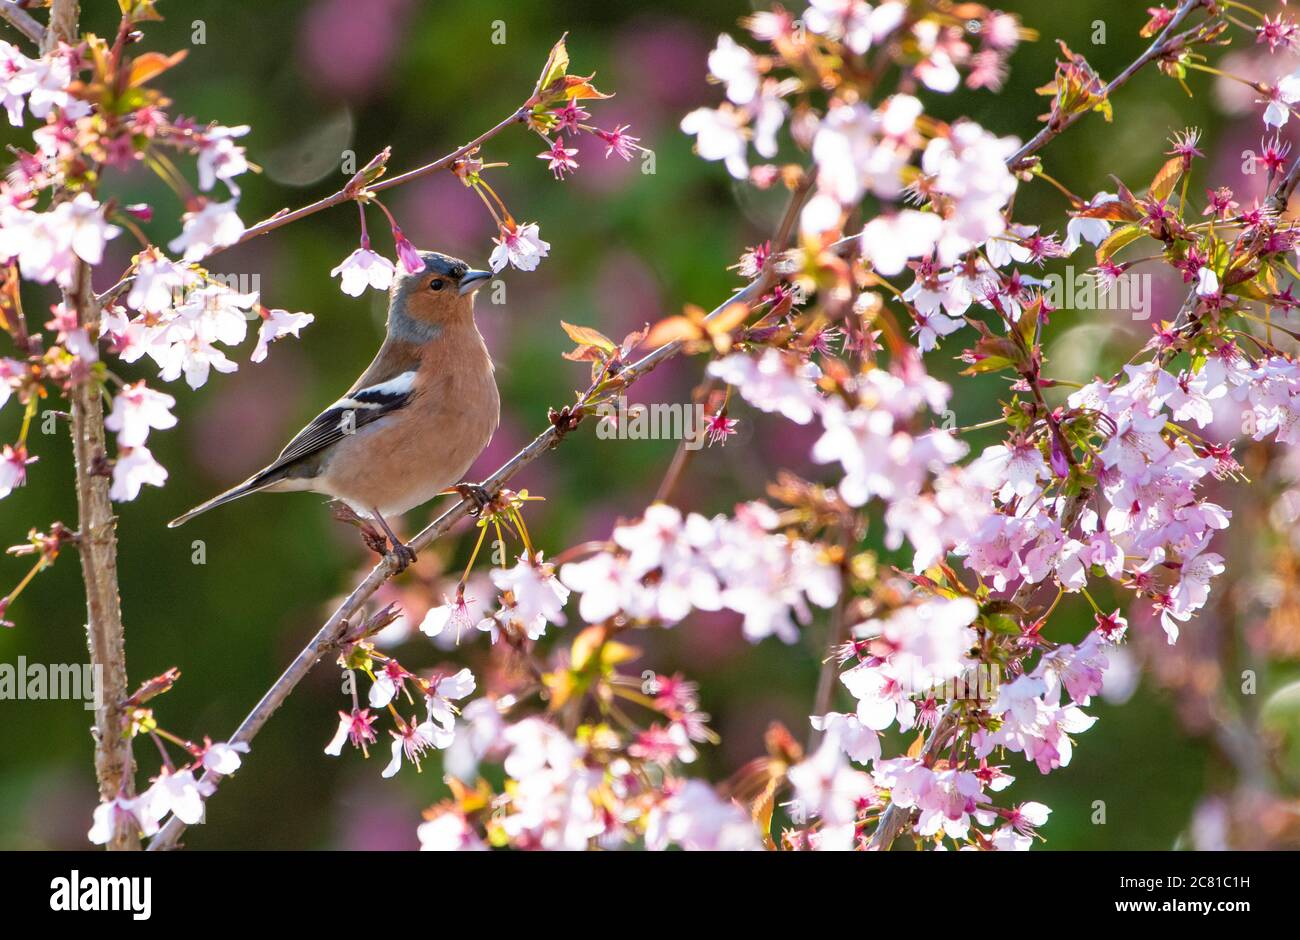 A male Chaffinch in the cherry blossom, Chipping, Preston, Lancashire. UK Stock Photo